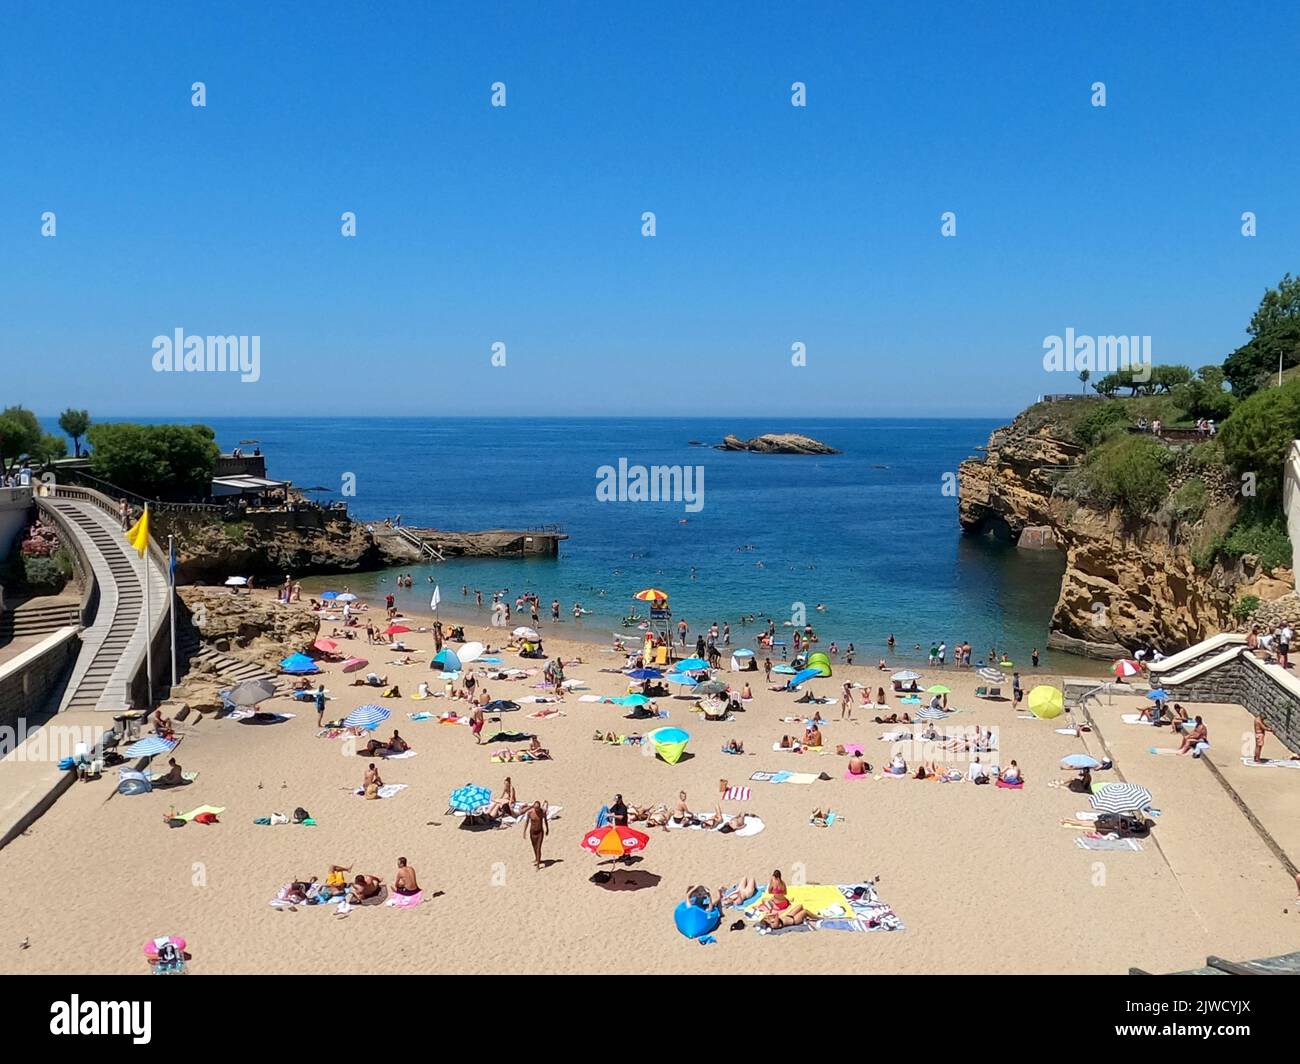 Biarritz, Atlantique Pyrenees. France: July 11, 2022: A view over the Plage du Port Vieux beach in Biarritz, France, with some people enjoying the bea Stock Photo